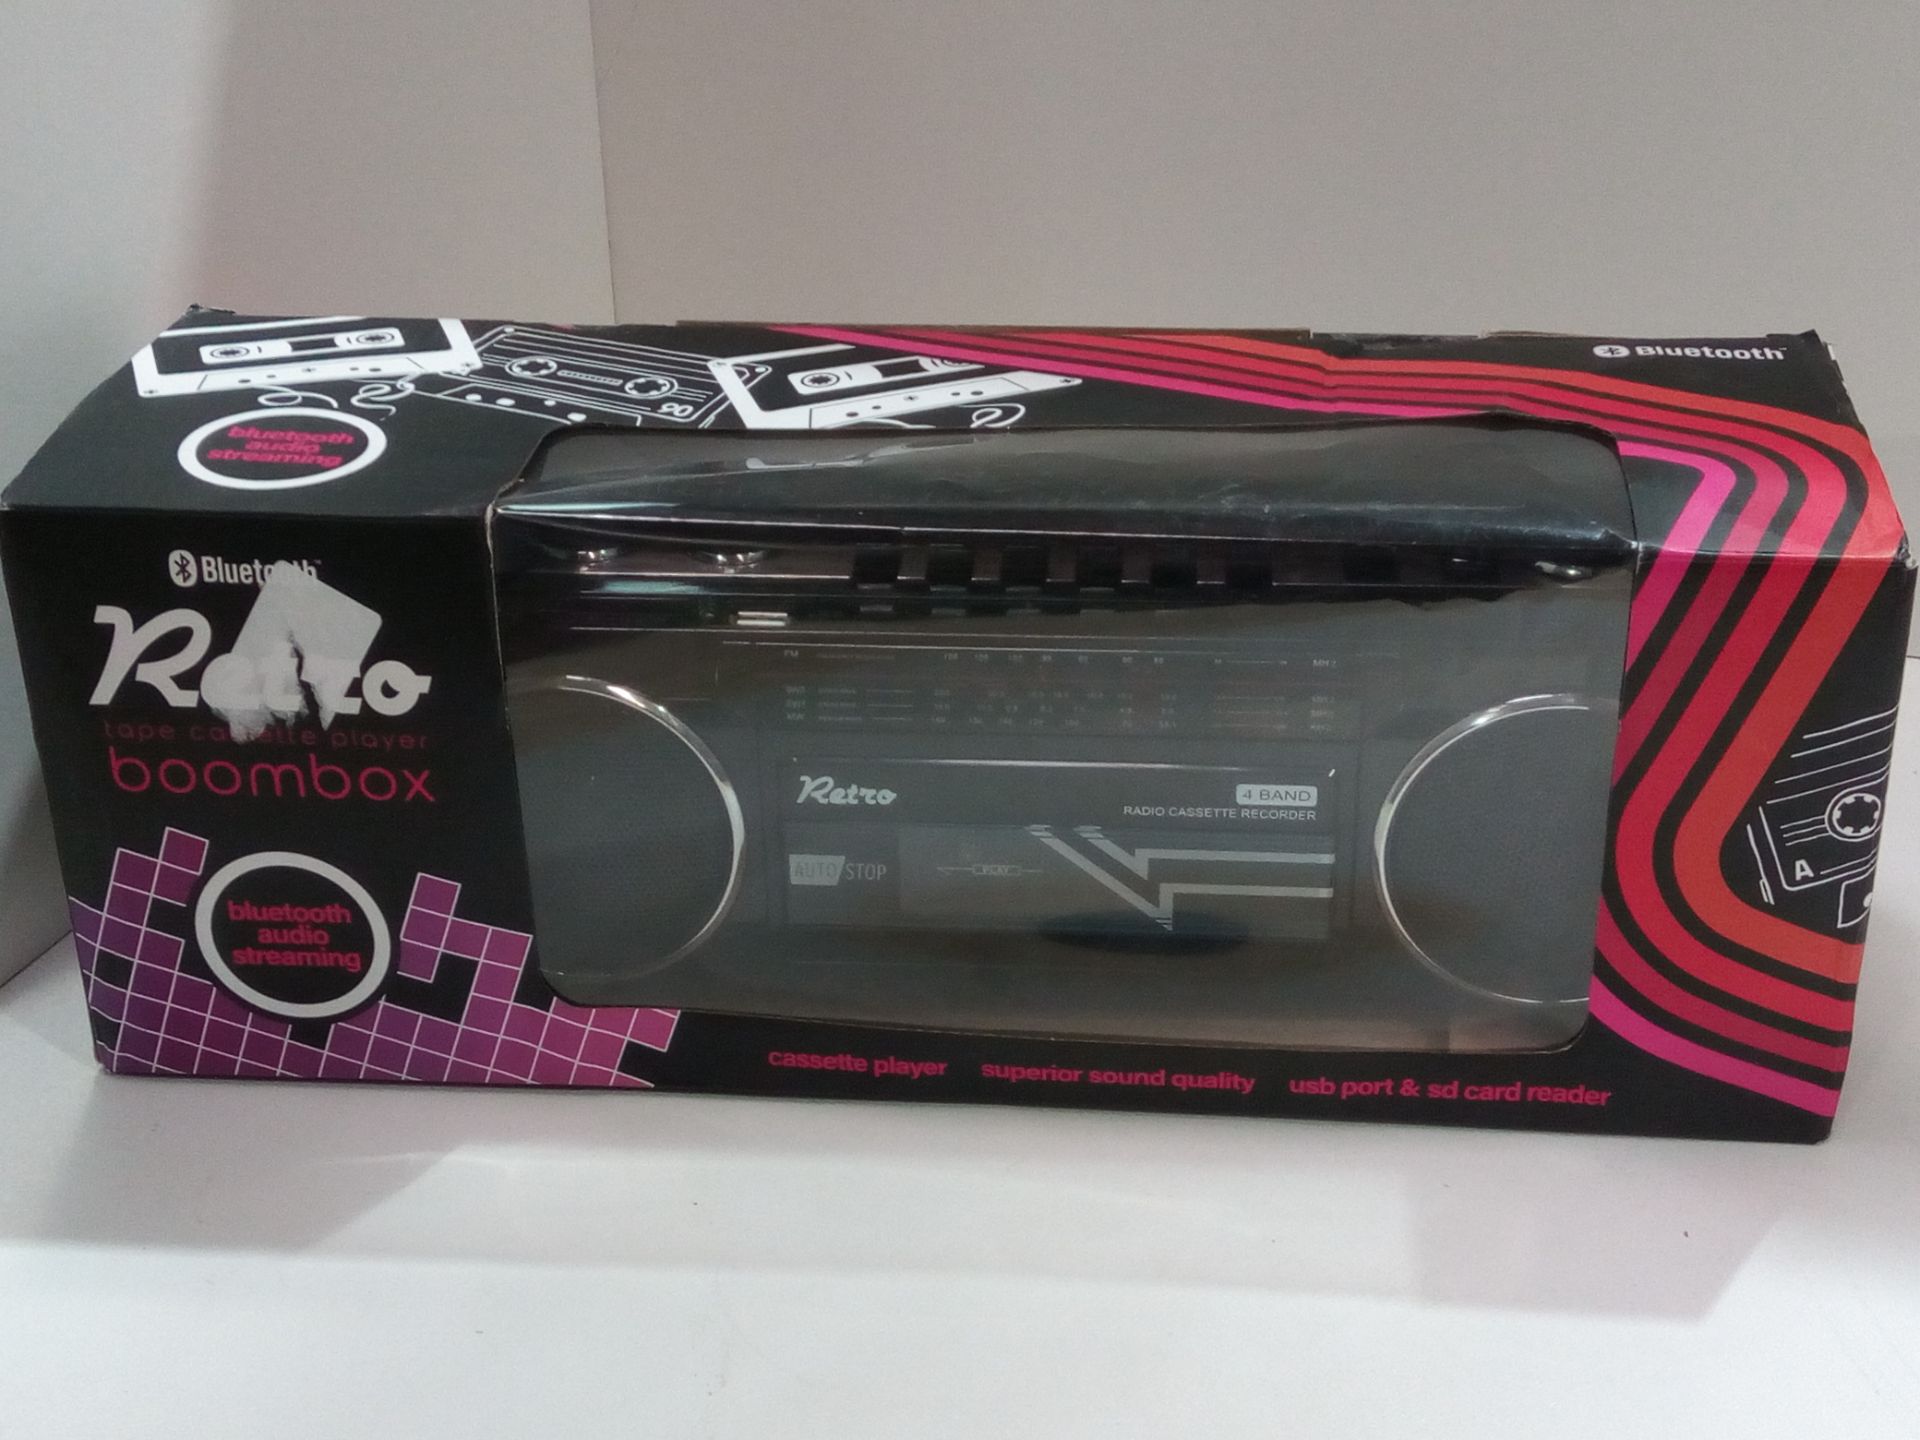 RRP £28.00 Cassette Boombox Black - Image 2 of 2